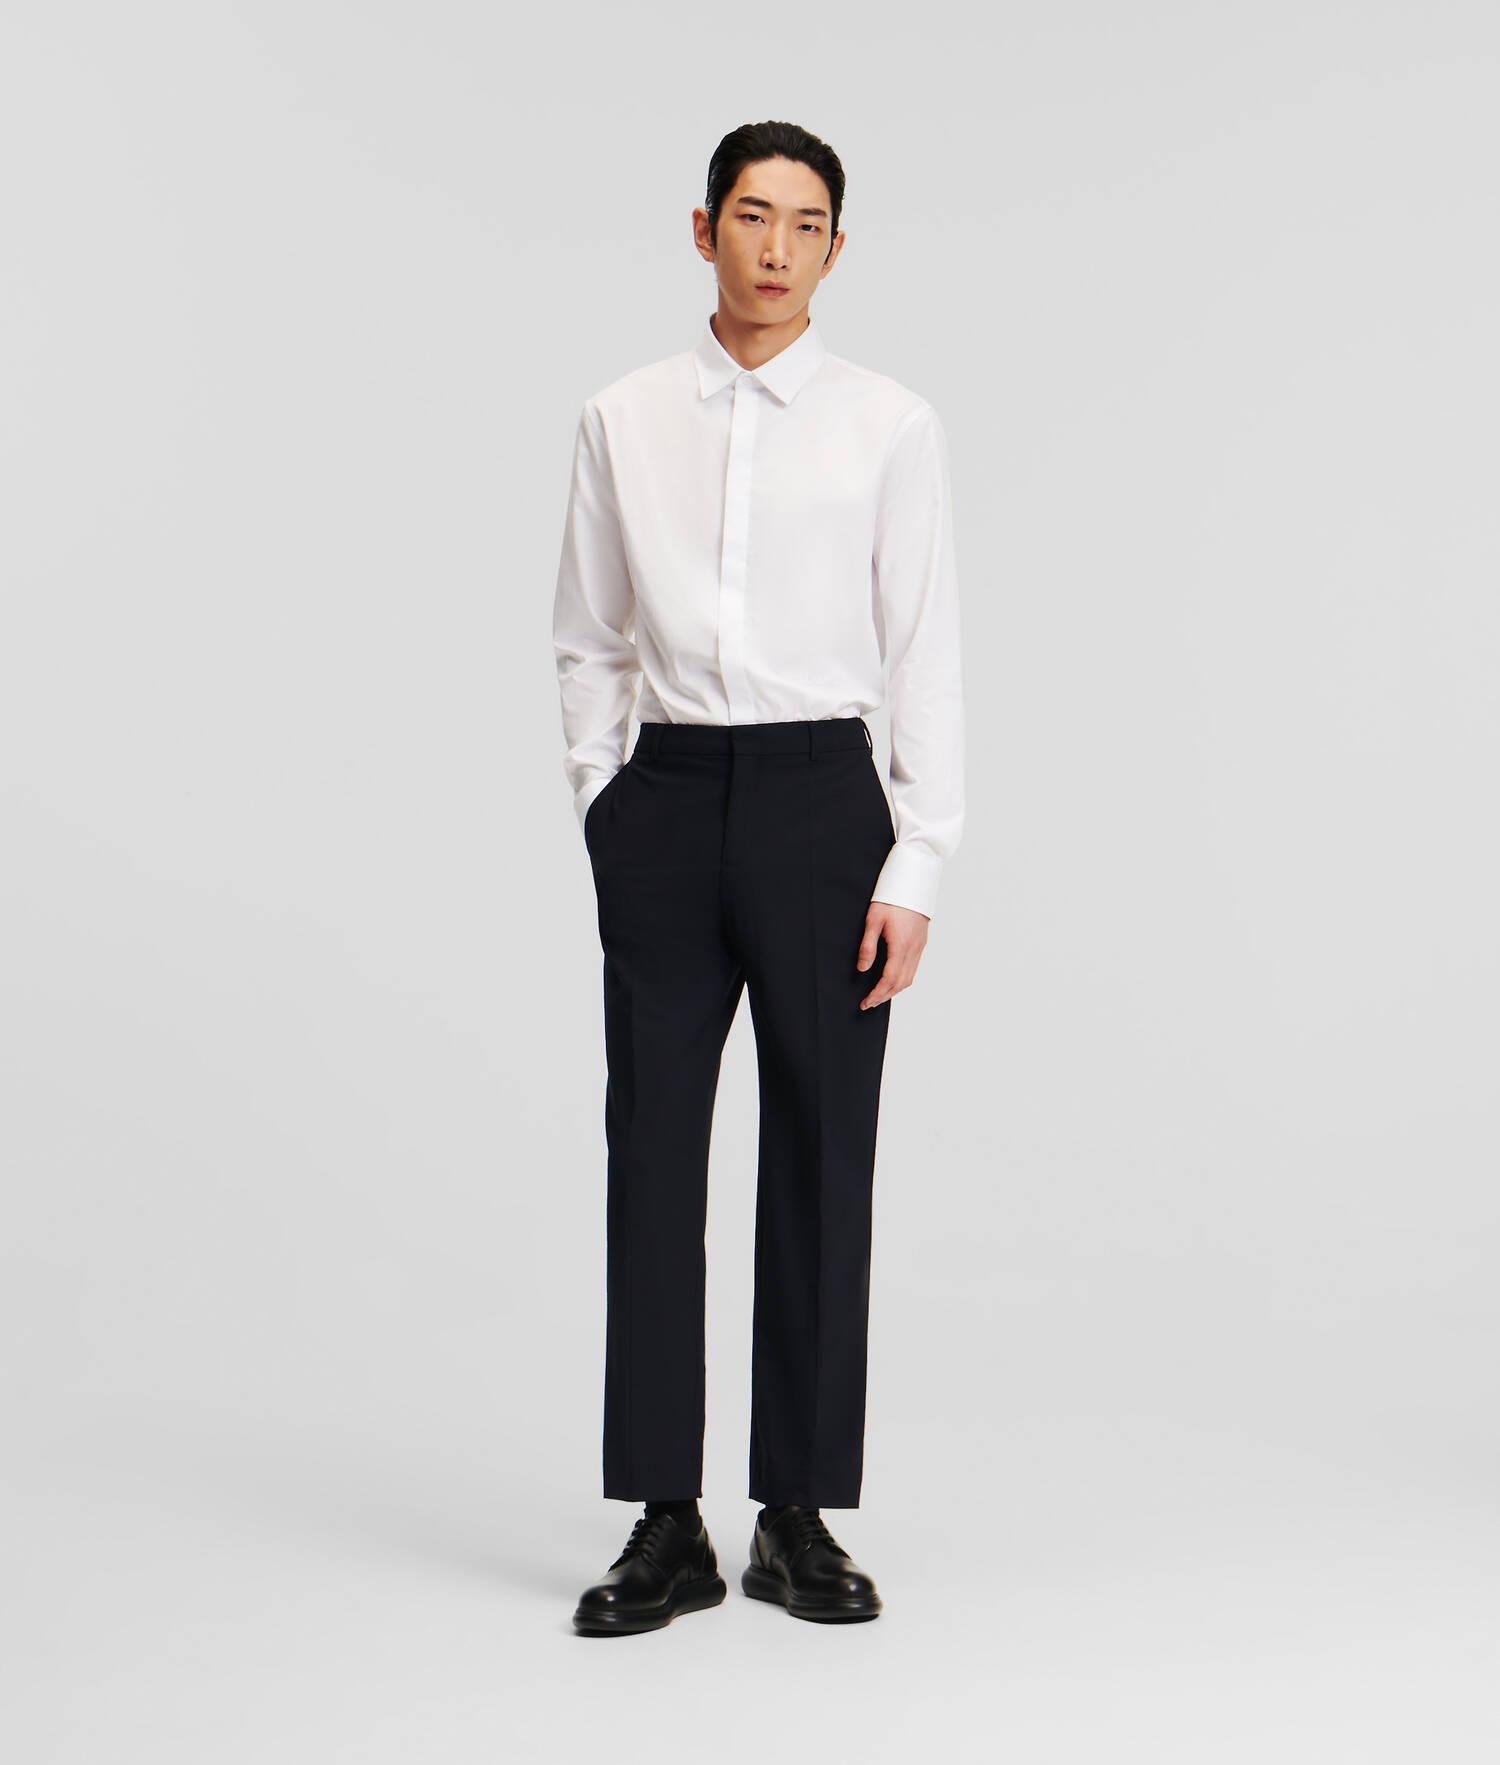 TAILORED PANTS by KARL LAGERFELD